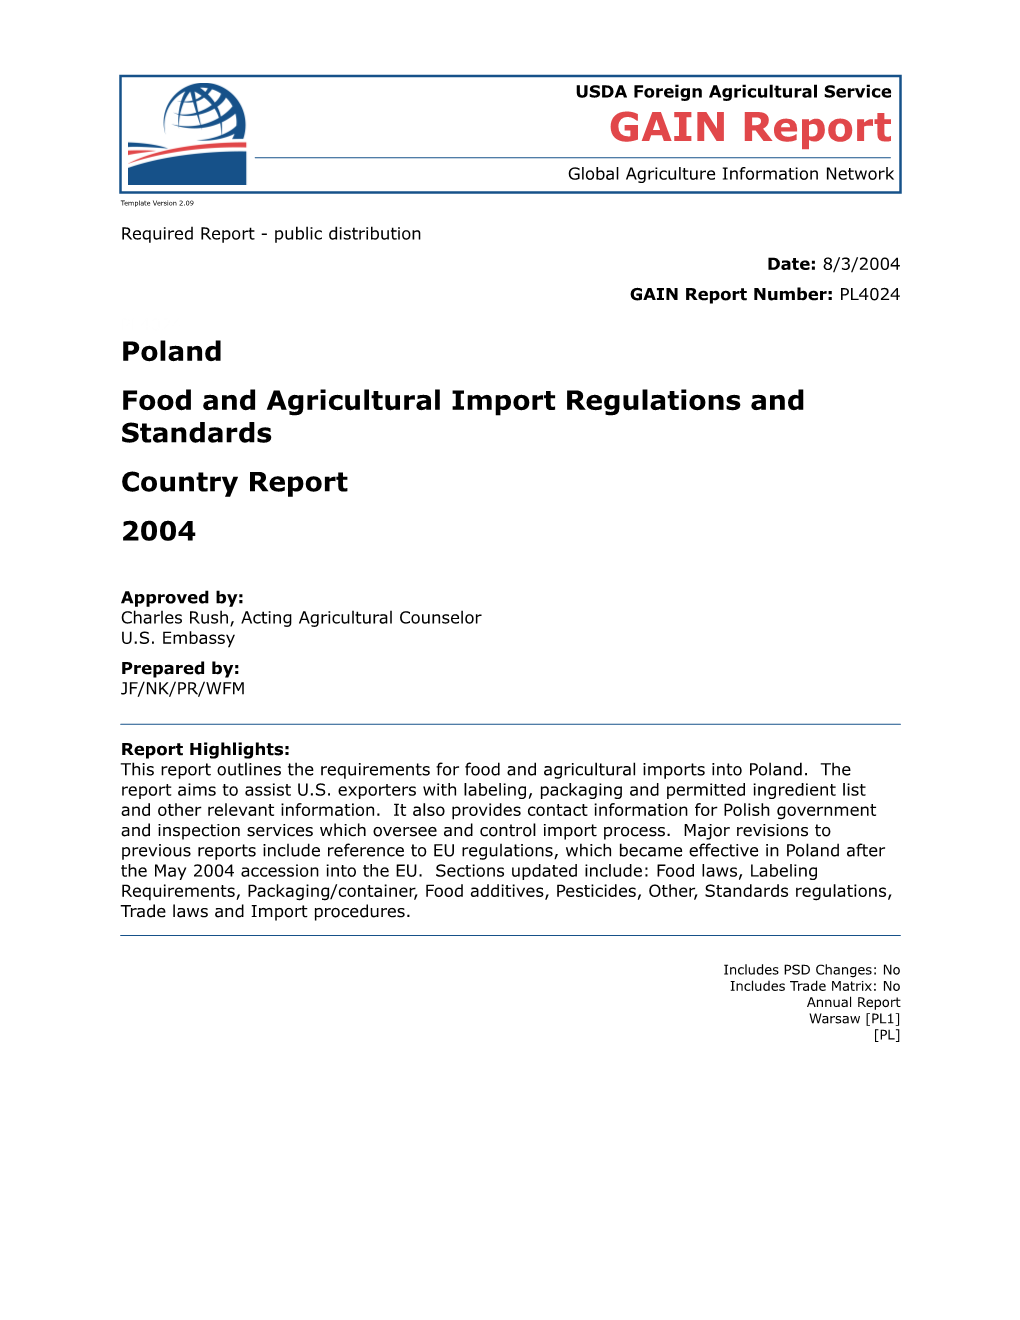 Food and Agricultural Import Regulations and Standards s1